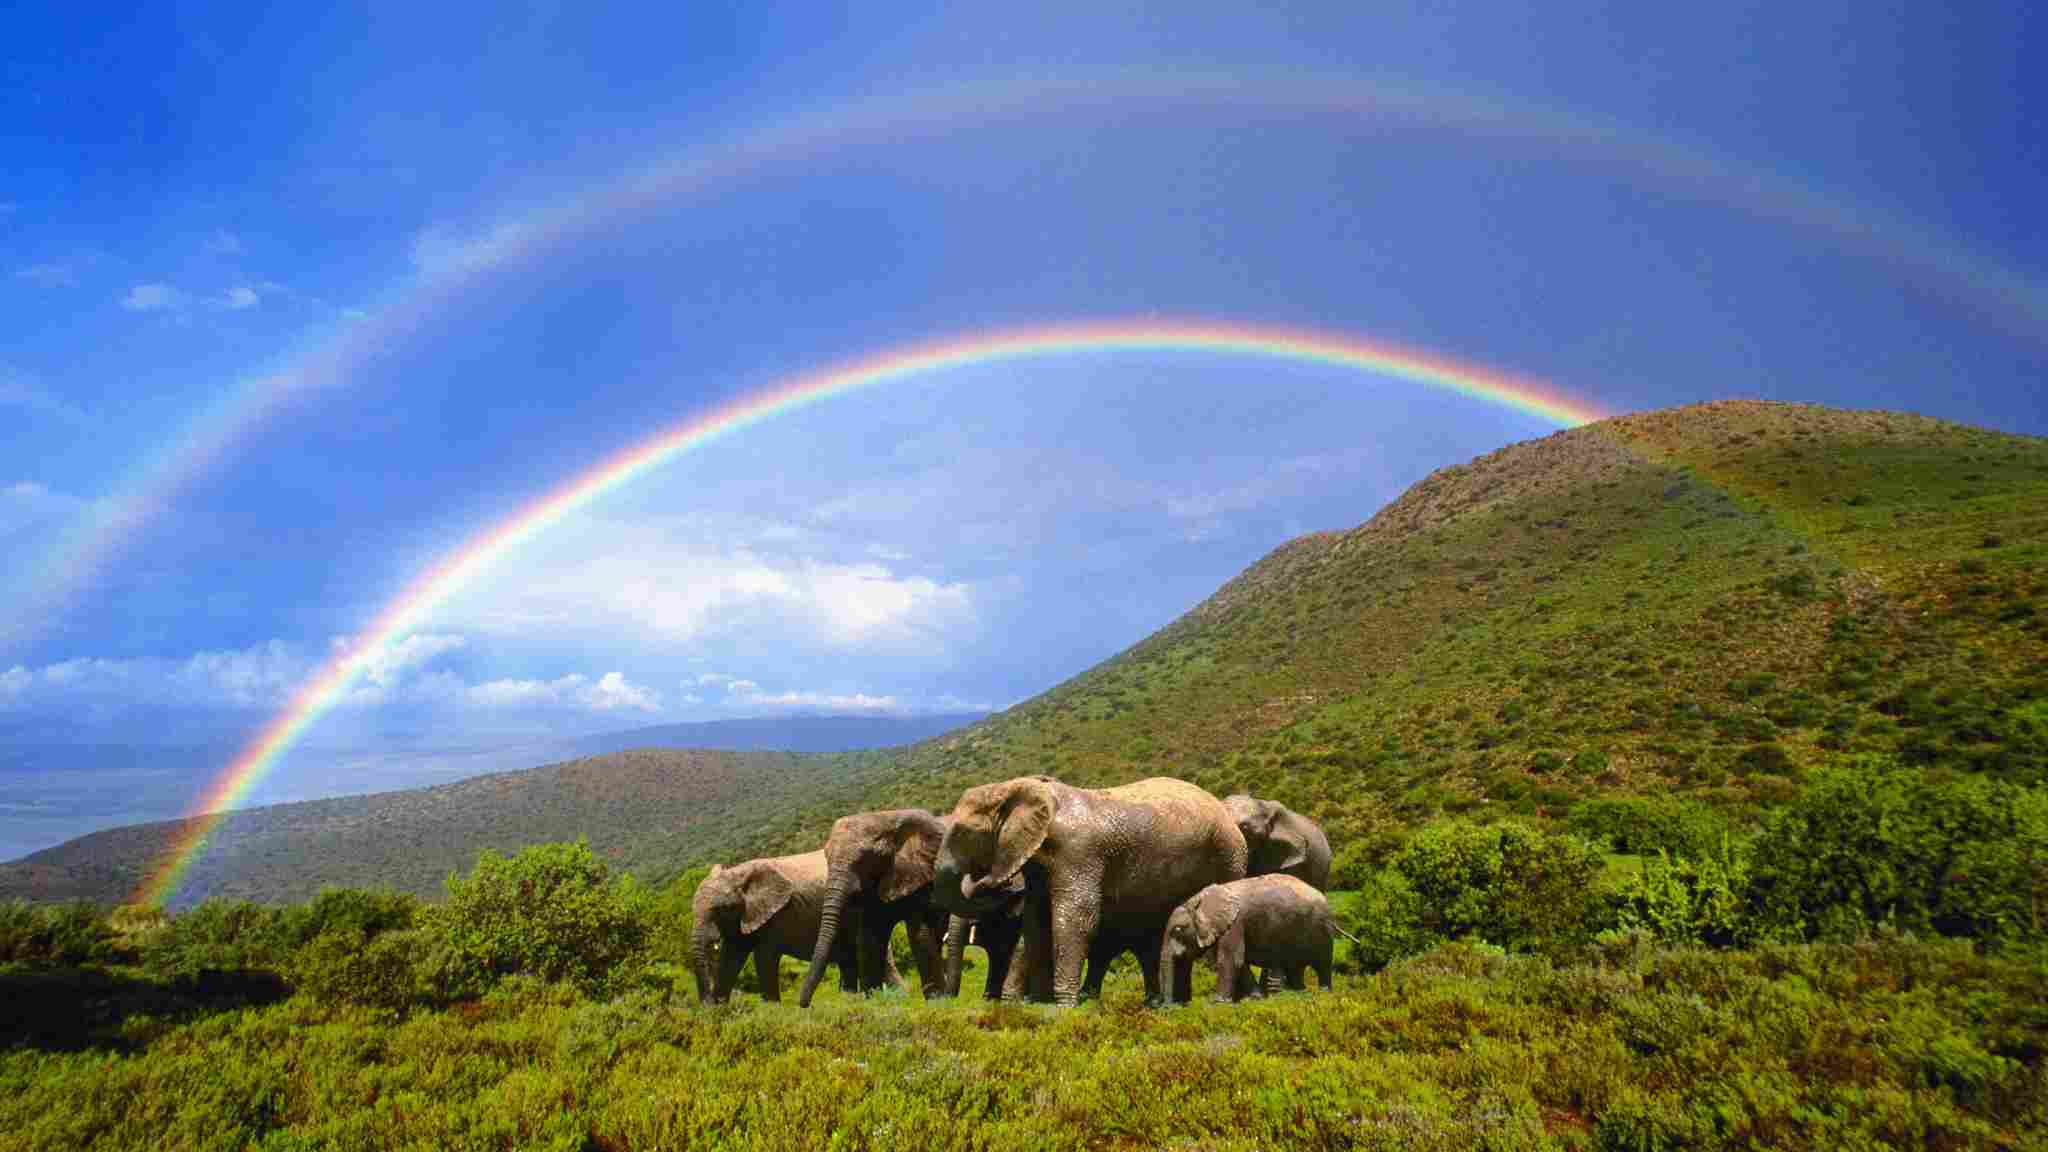 (Elephants in South Africa /VCG Photo)